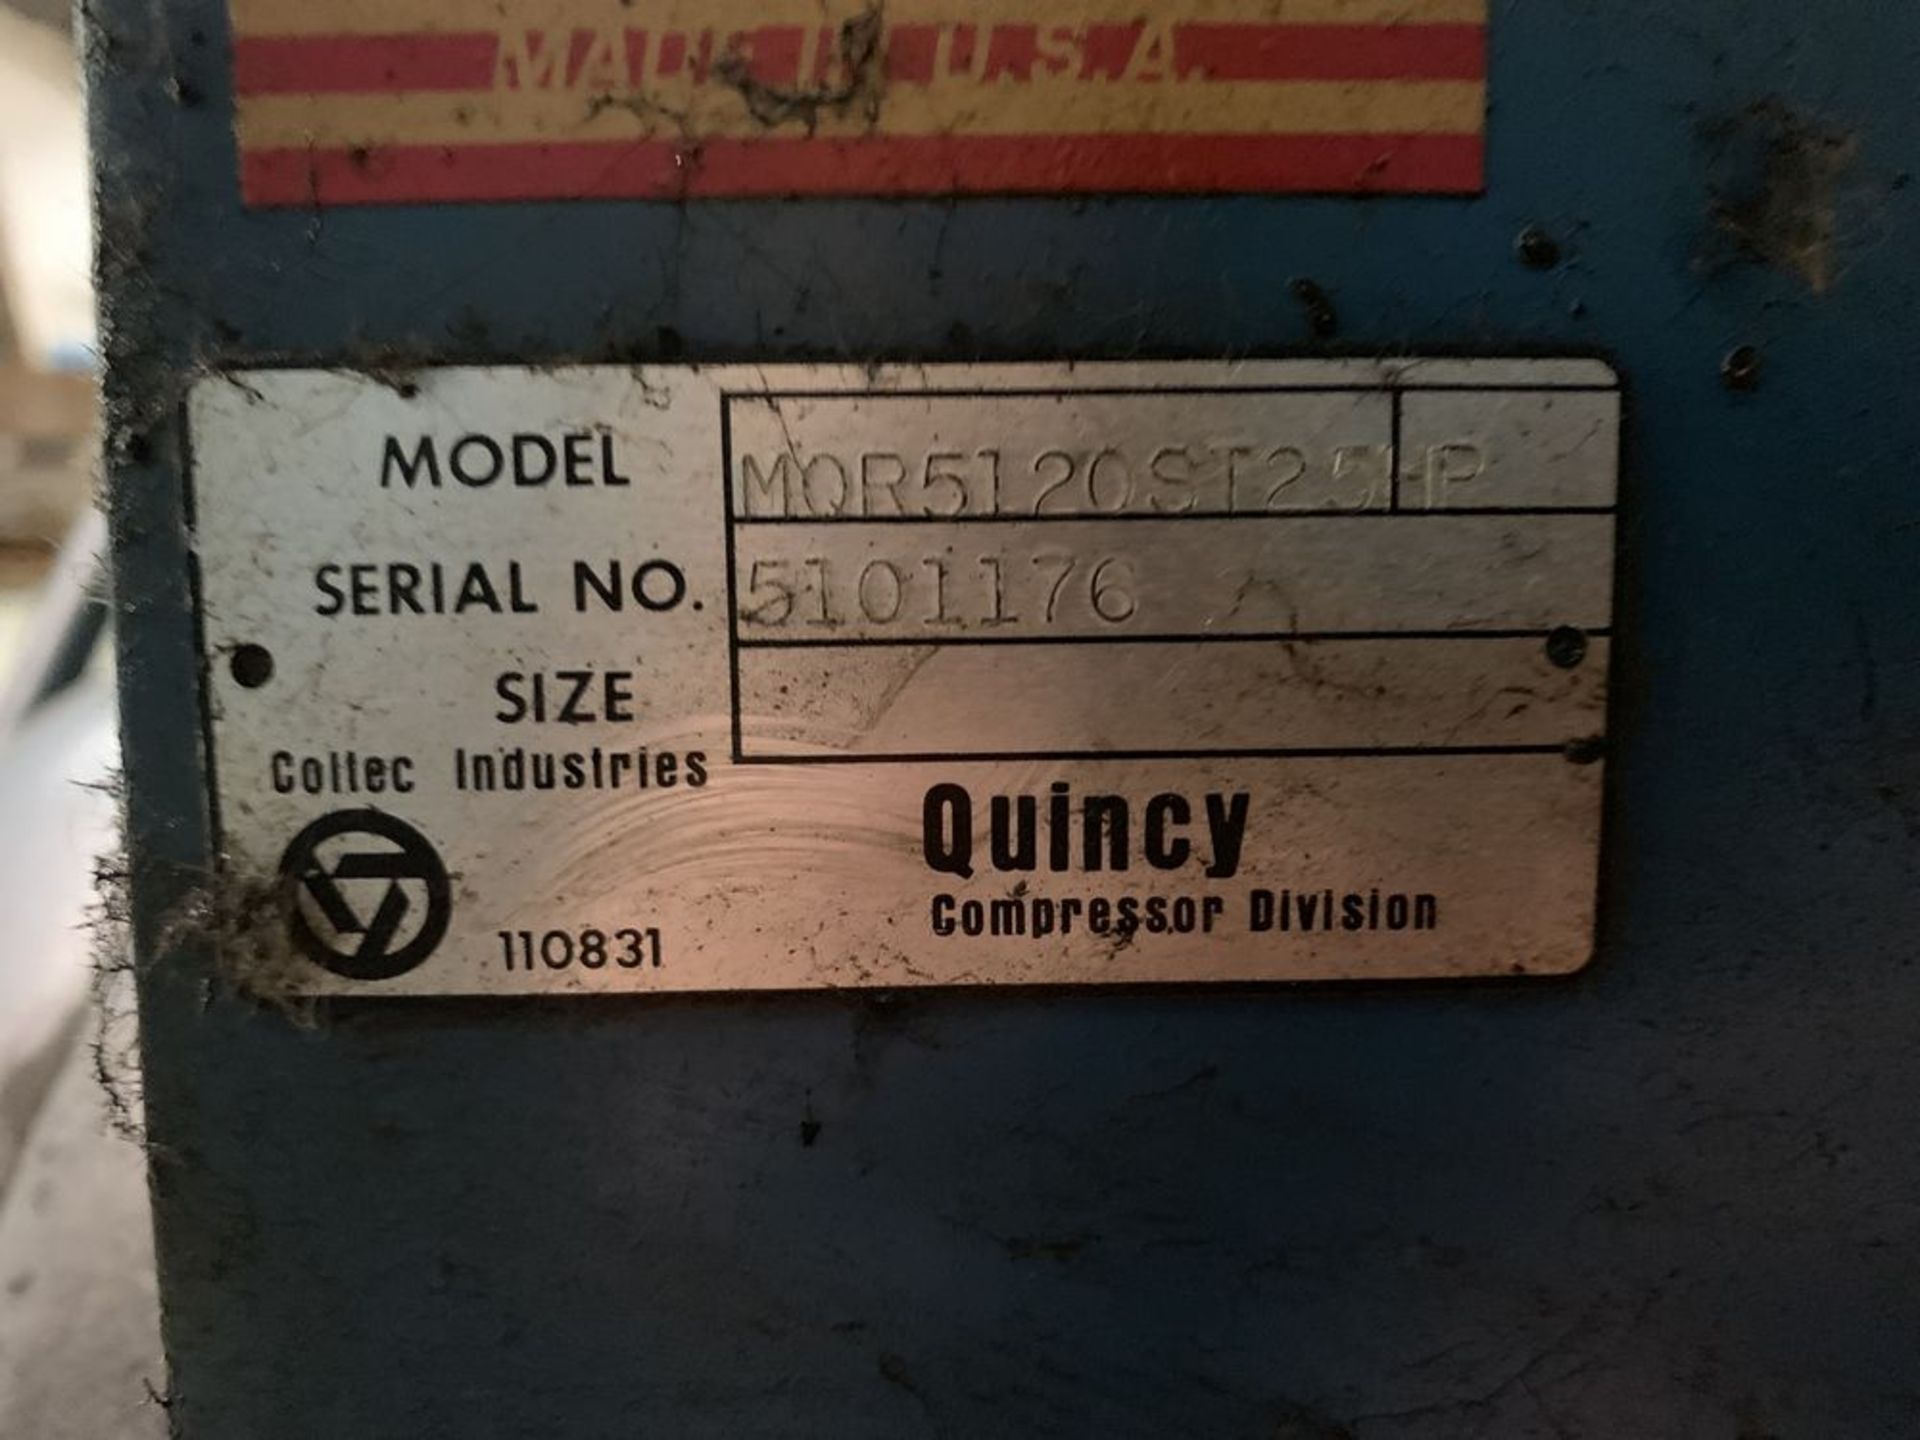 25 HP Quincy Ar Compressor Model MQR5120ST25HP - Image 3 of 3